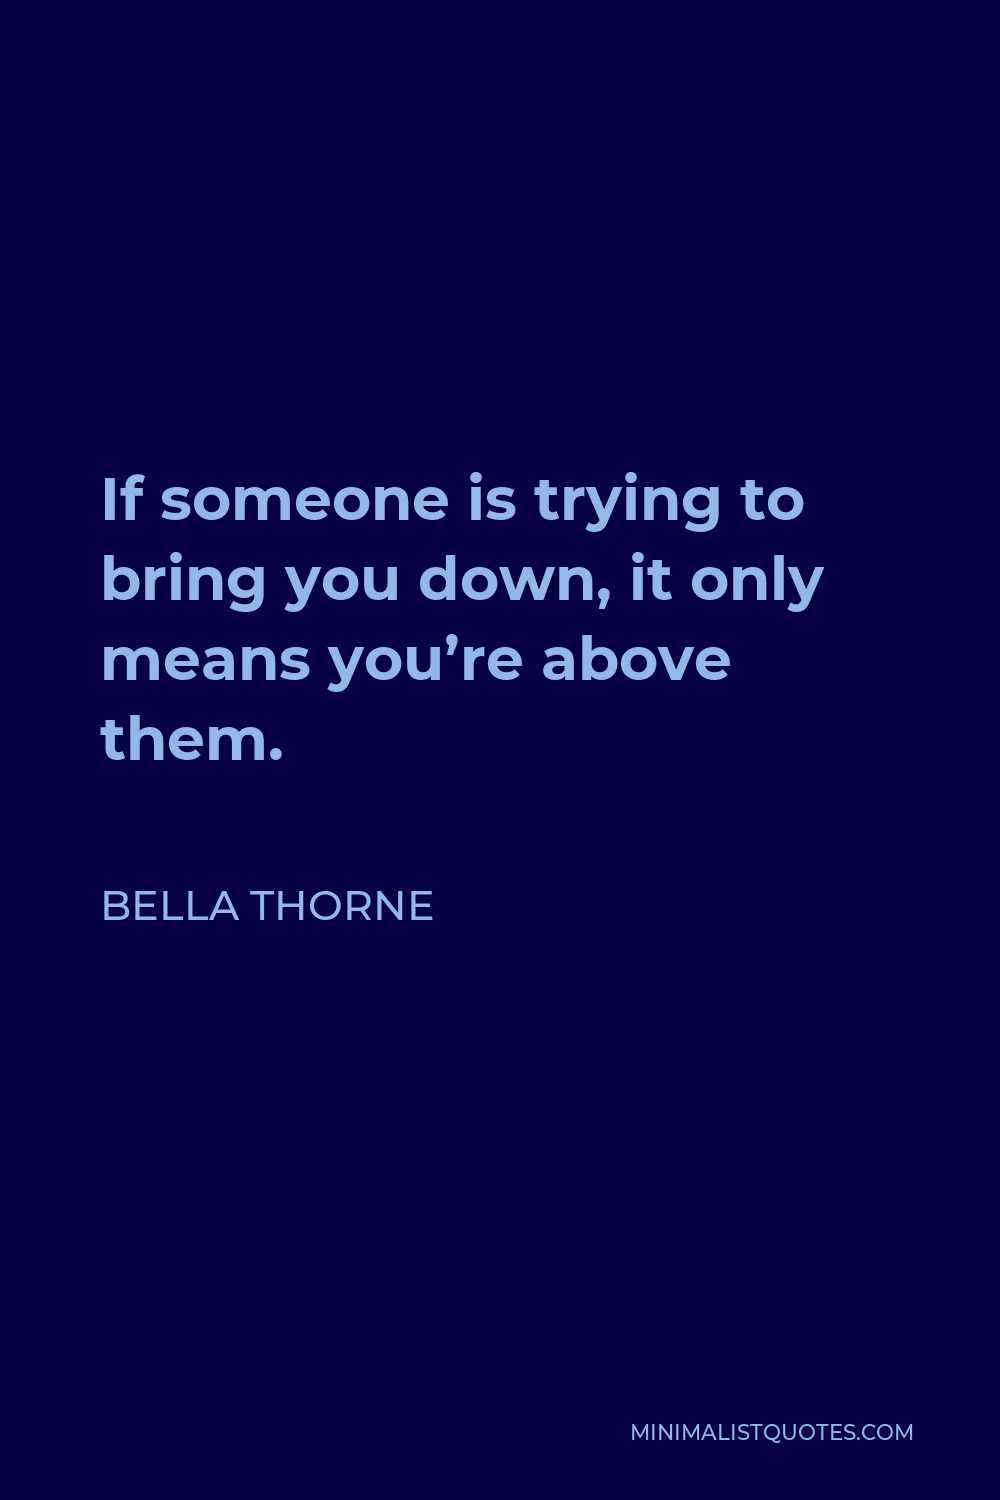 Bella Thorne Quote - If someone is trying to bring you down, it only means you’re above them.